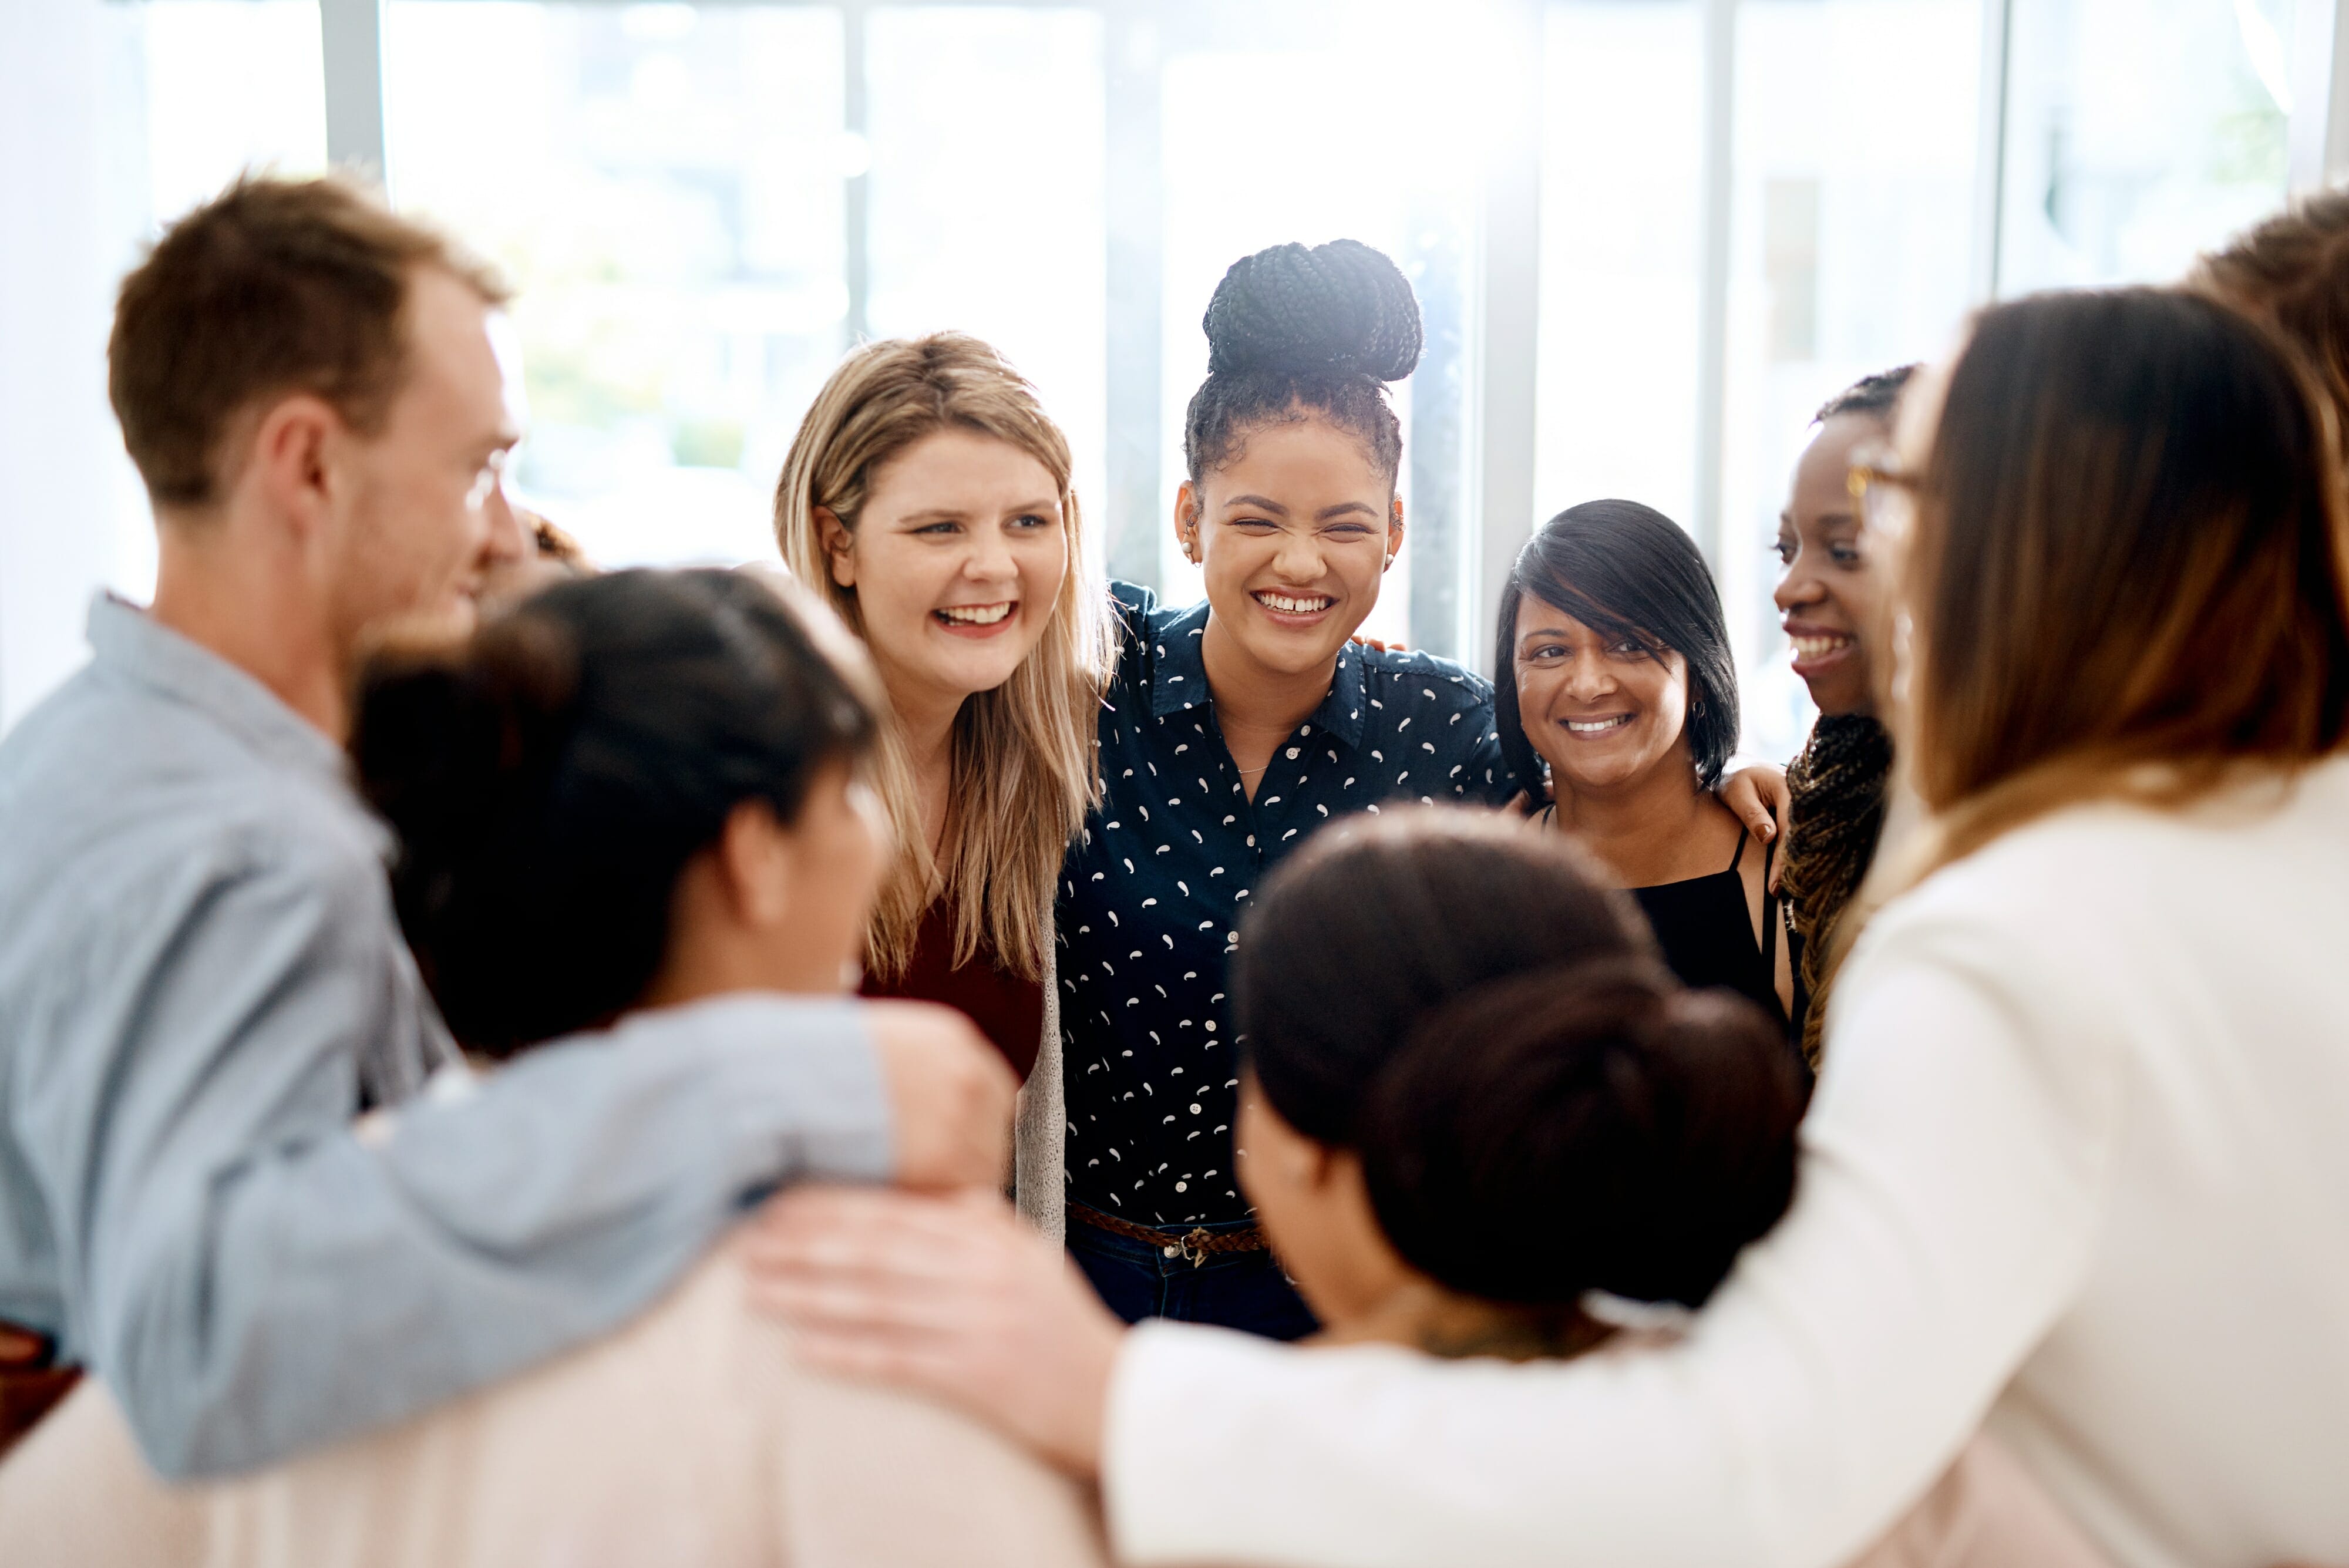 Woman surround with positive environment